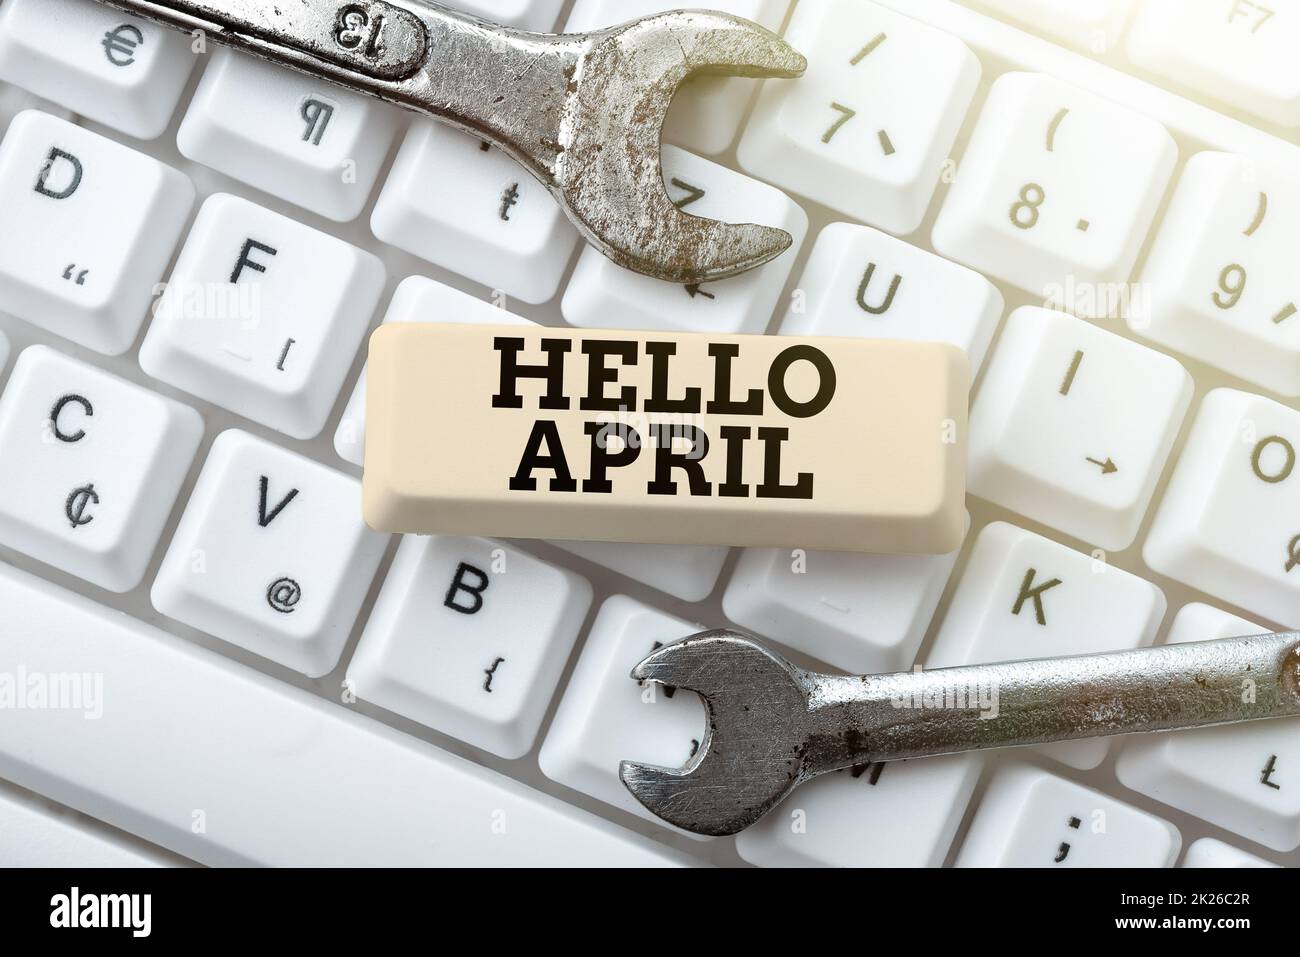 Text caption presenting Hello April. Internet Concept a greeting expression used when welcoming the month of April Formatting And Compiling Online Datas, Abstract Editing Spreadsheet Stock Photo